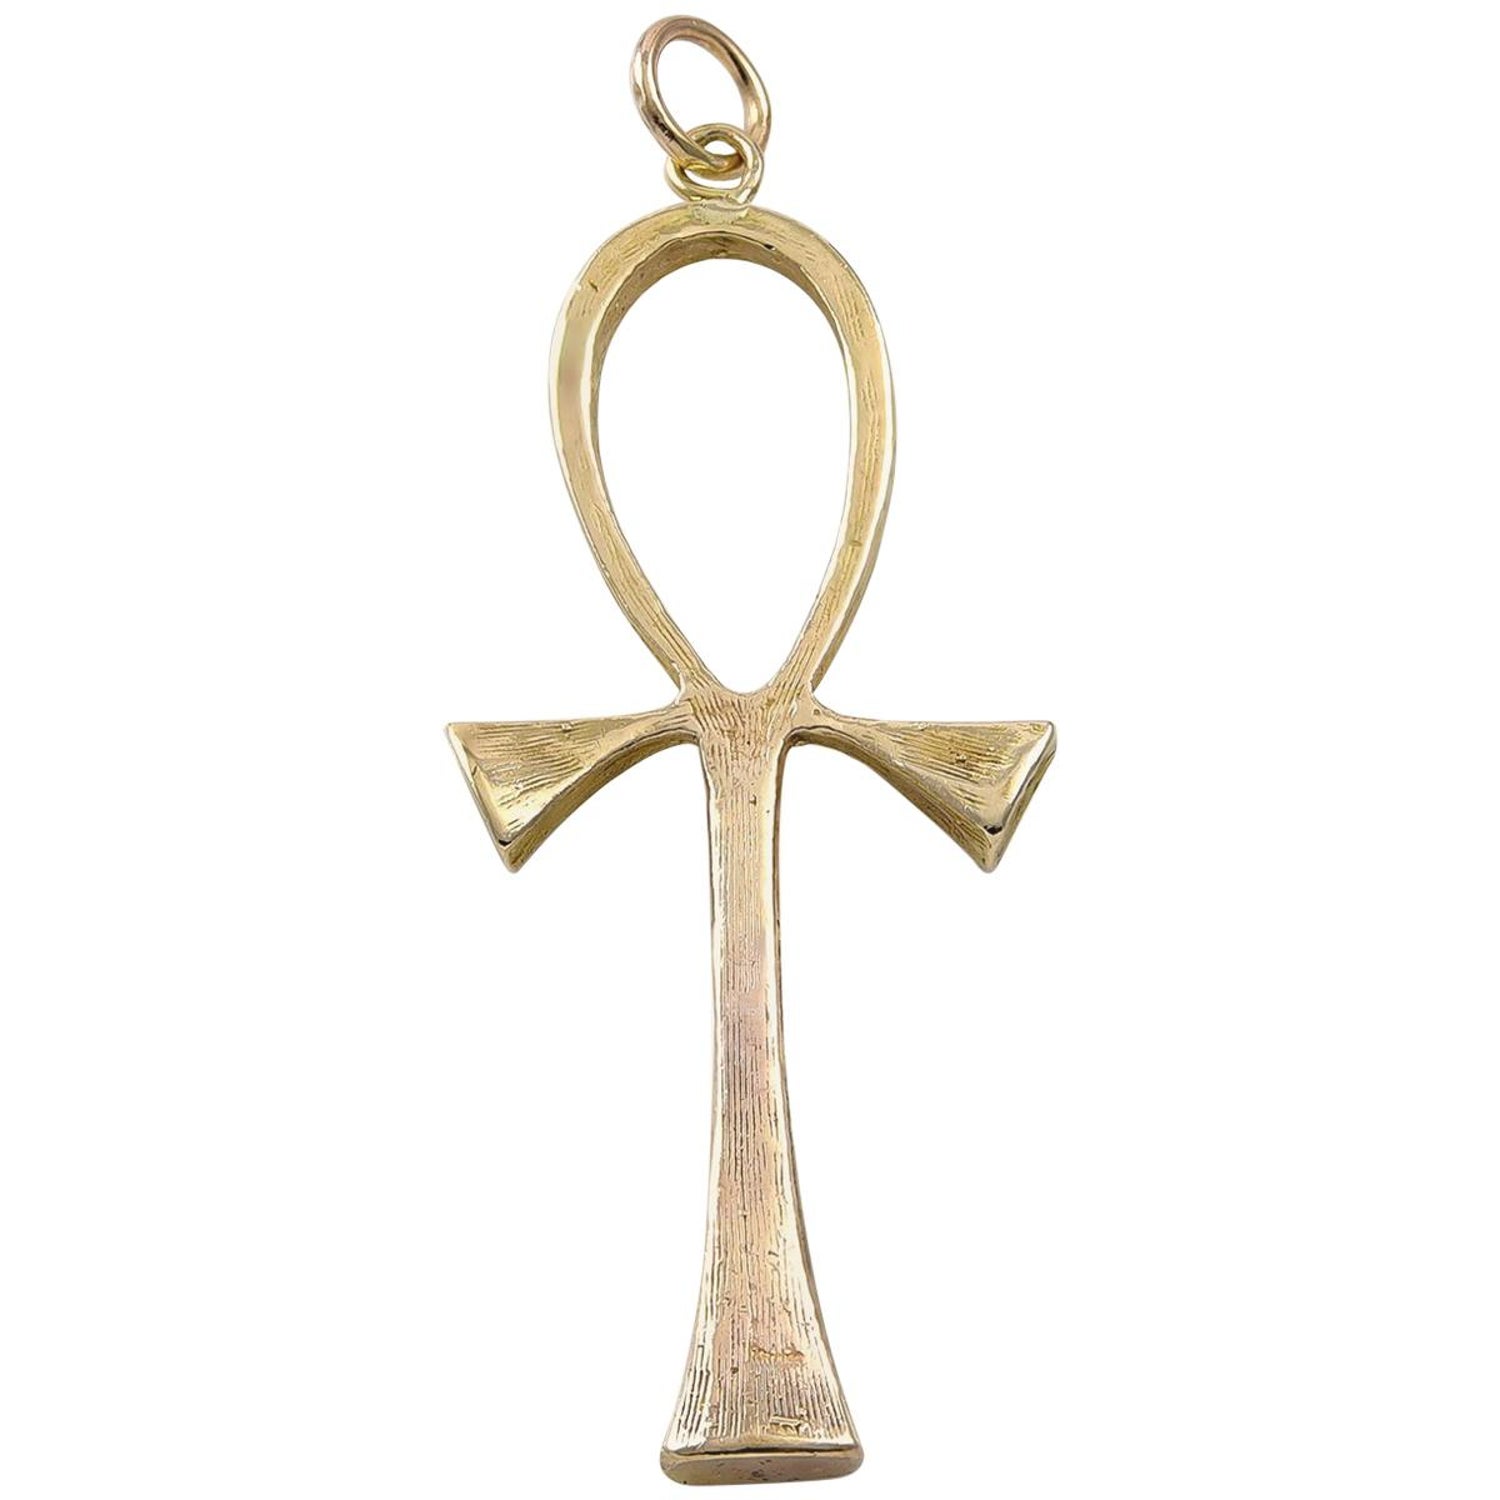 3/4 Inch x 1 1/4 Inch PicturesOnGold.com Large Ankh Cross in Solid 14K Yellow or White Gold or Sterling Silver 